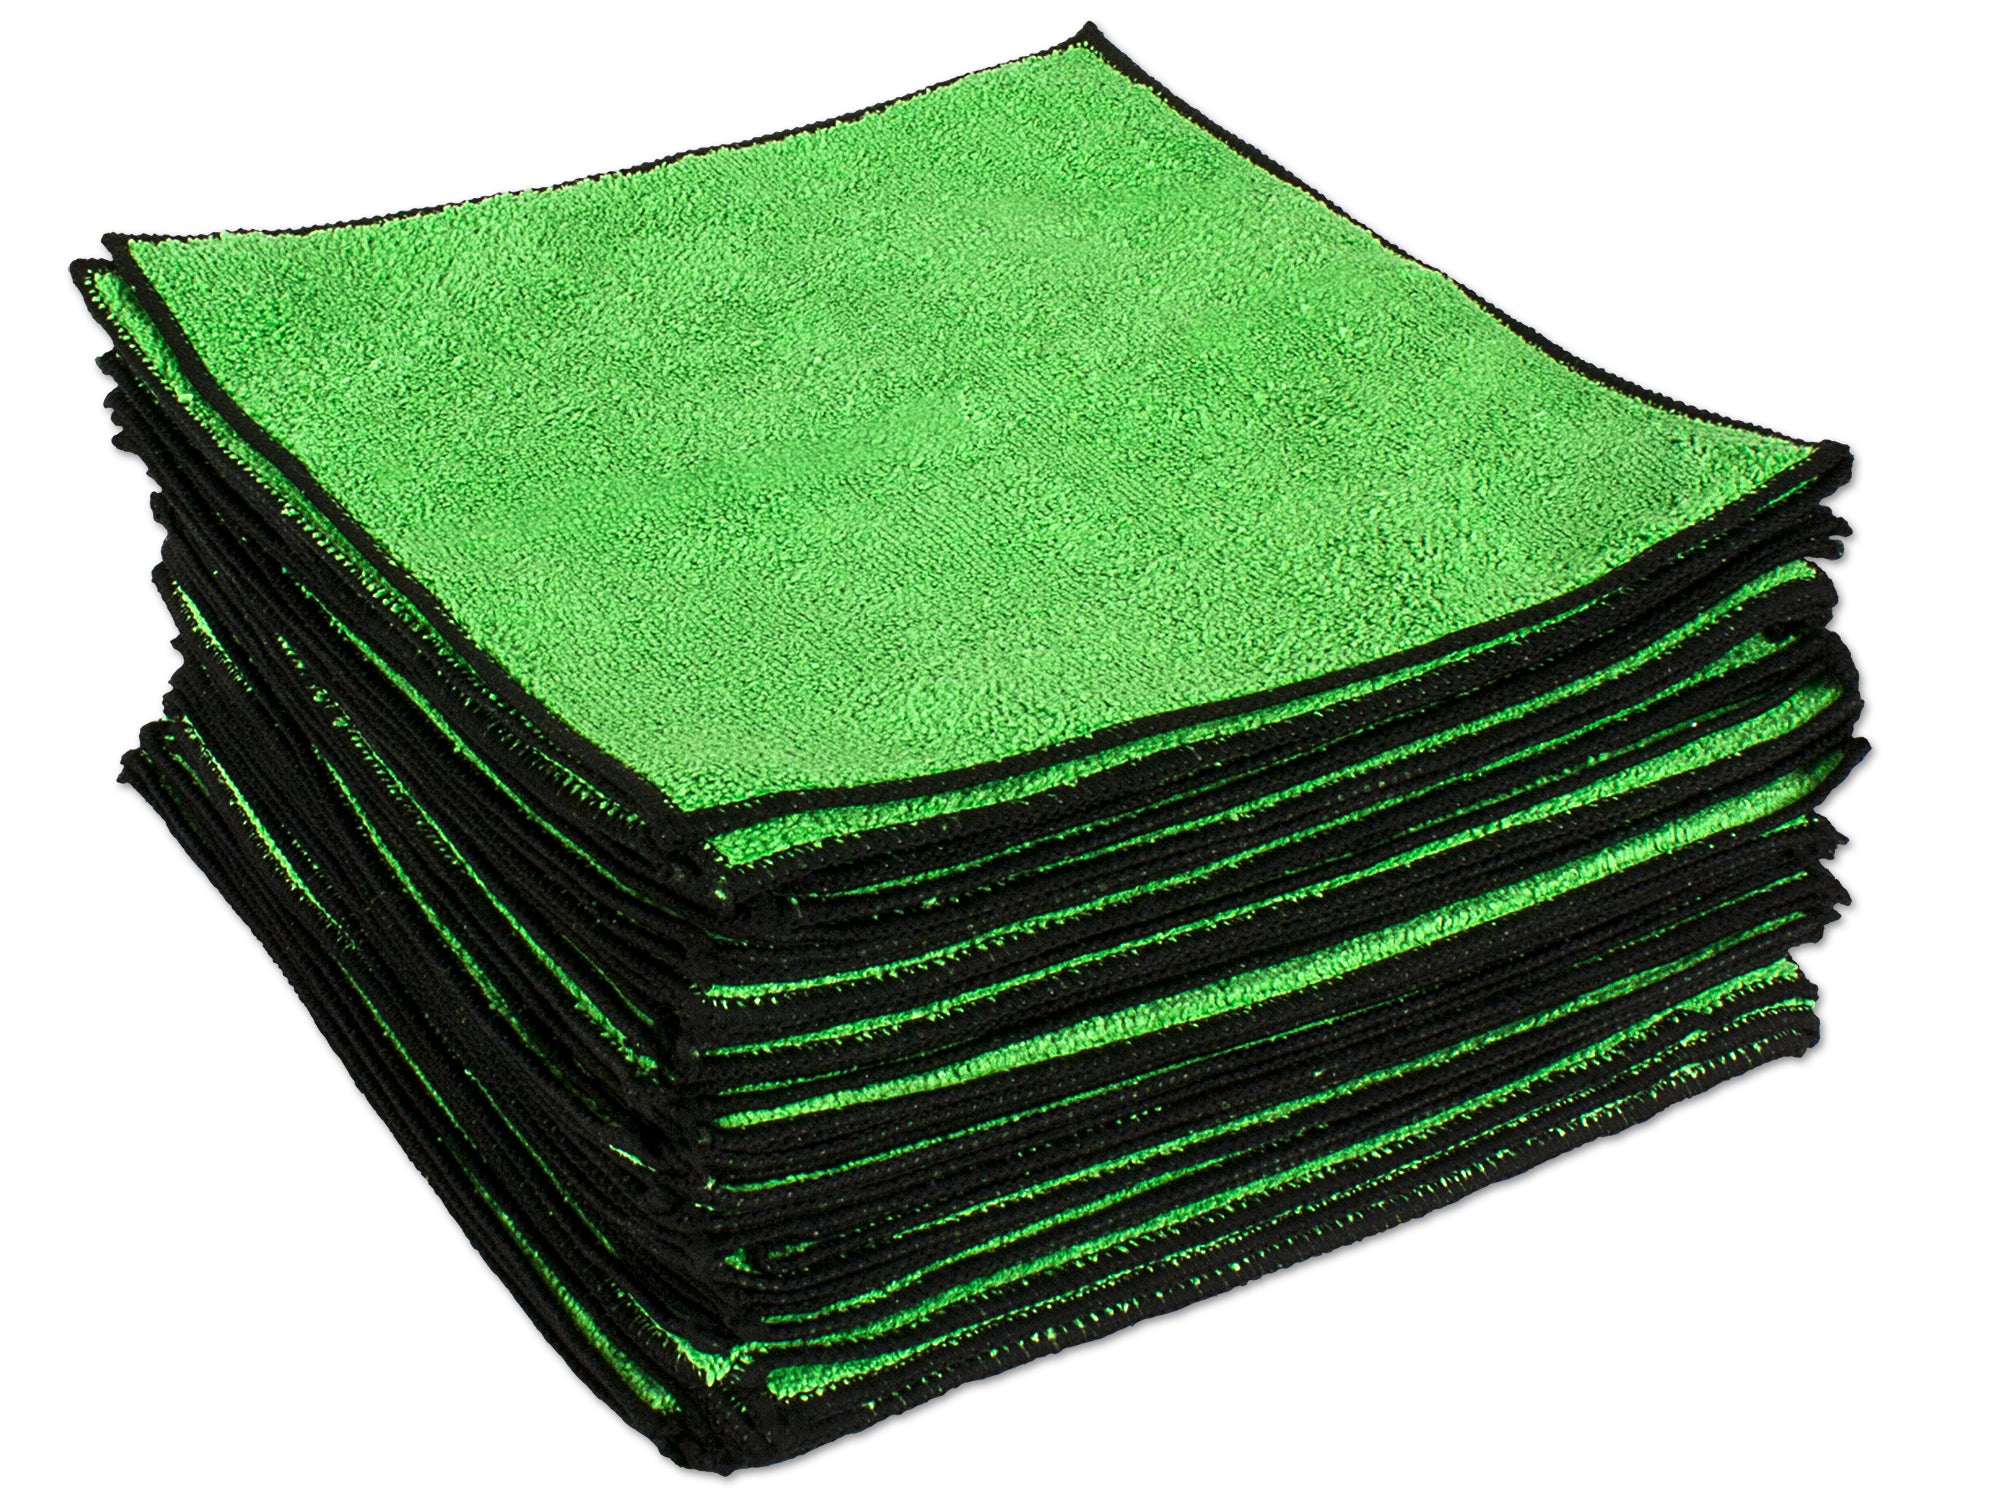 Eurow Microfiber Cleaning Towels Green with Black Trim 12 x 12in 350 GSM 50 Pack